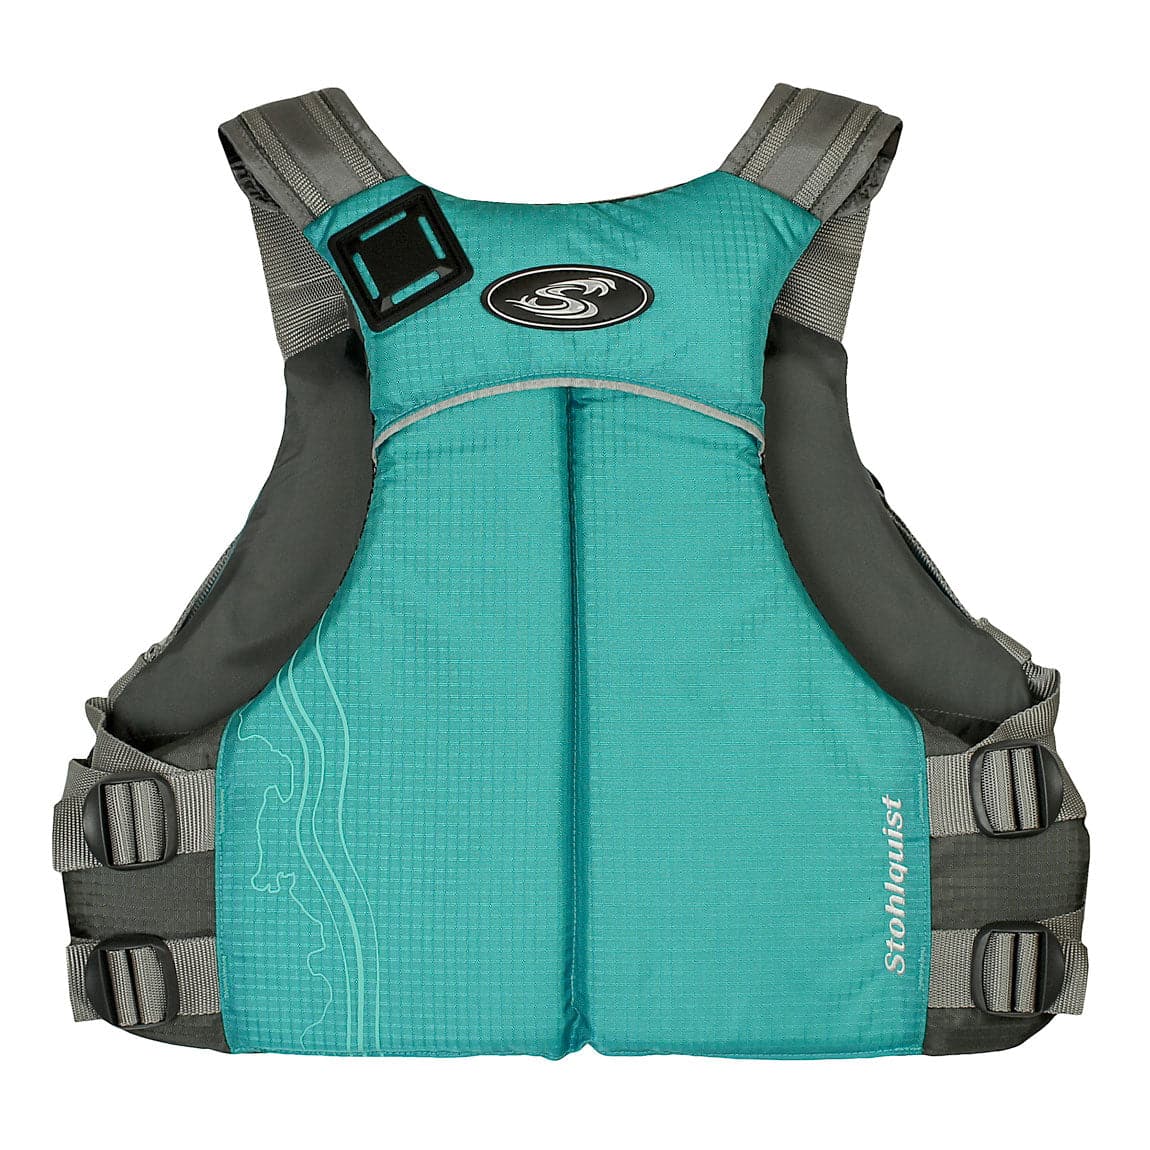 Featuring the Glide PFD women's pfd manufactured by Stohlquist shown here from a fifth angle.